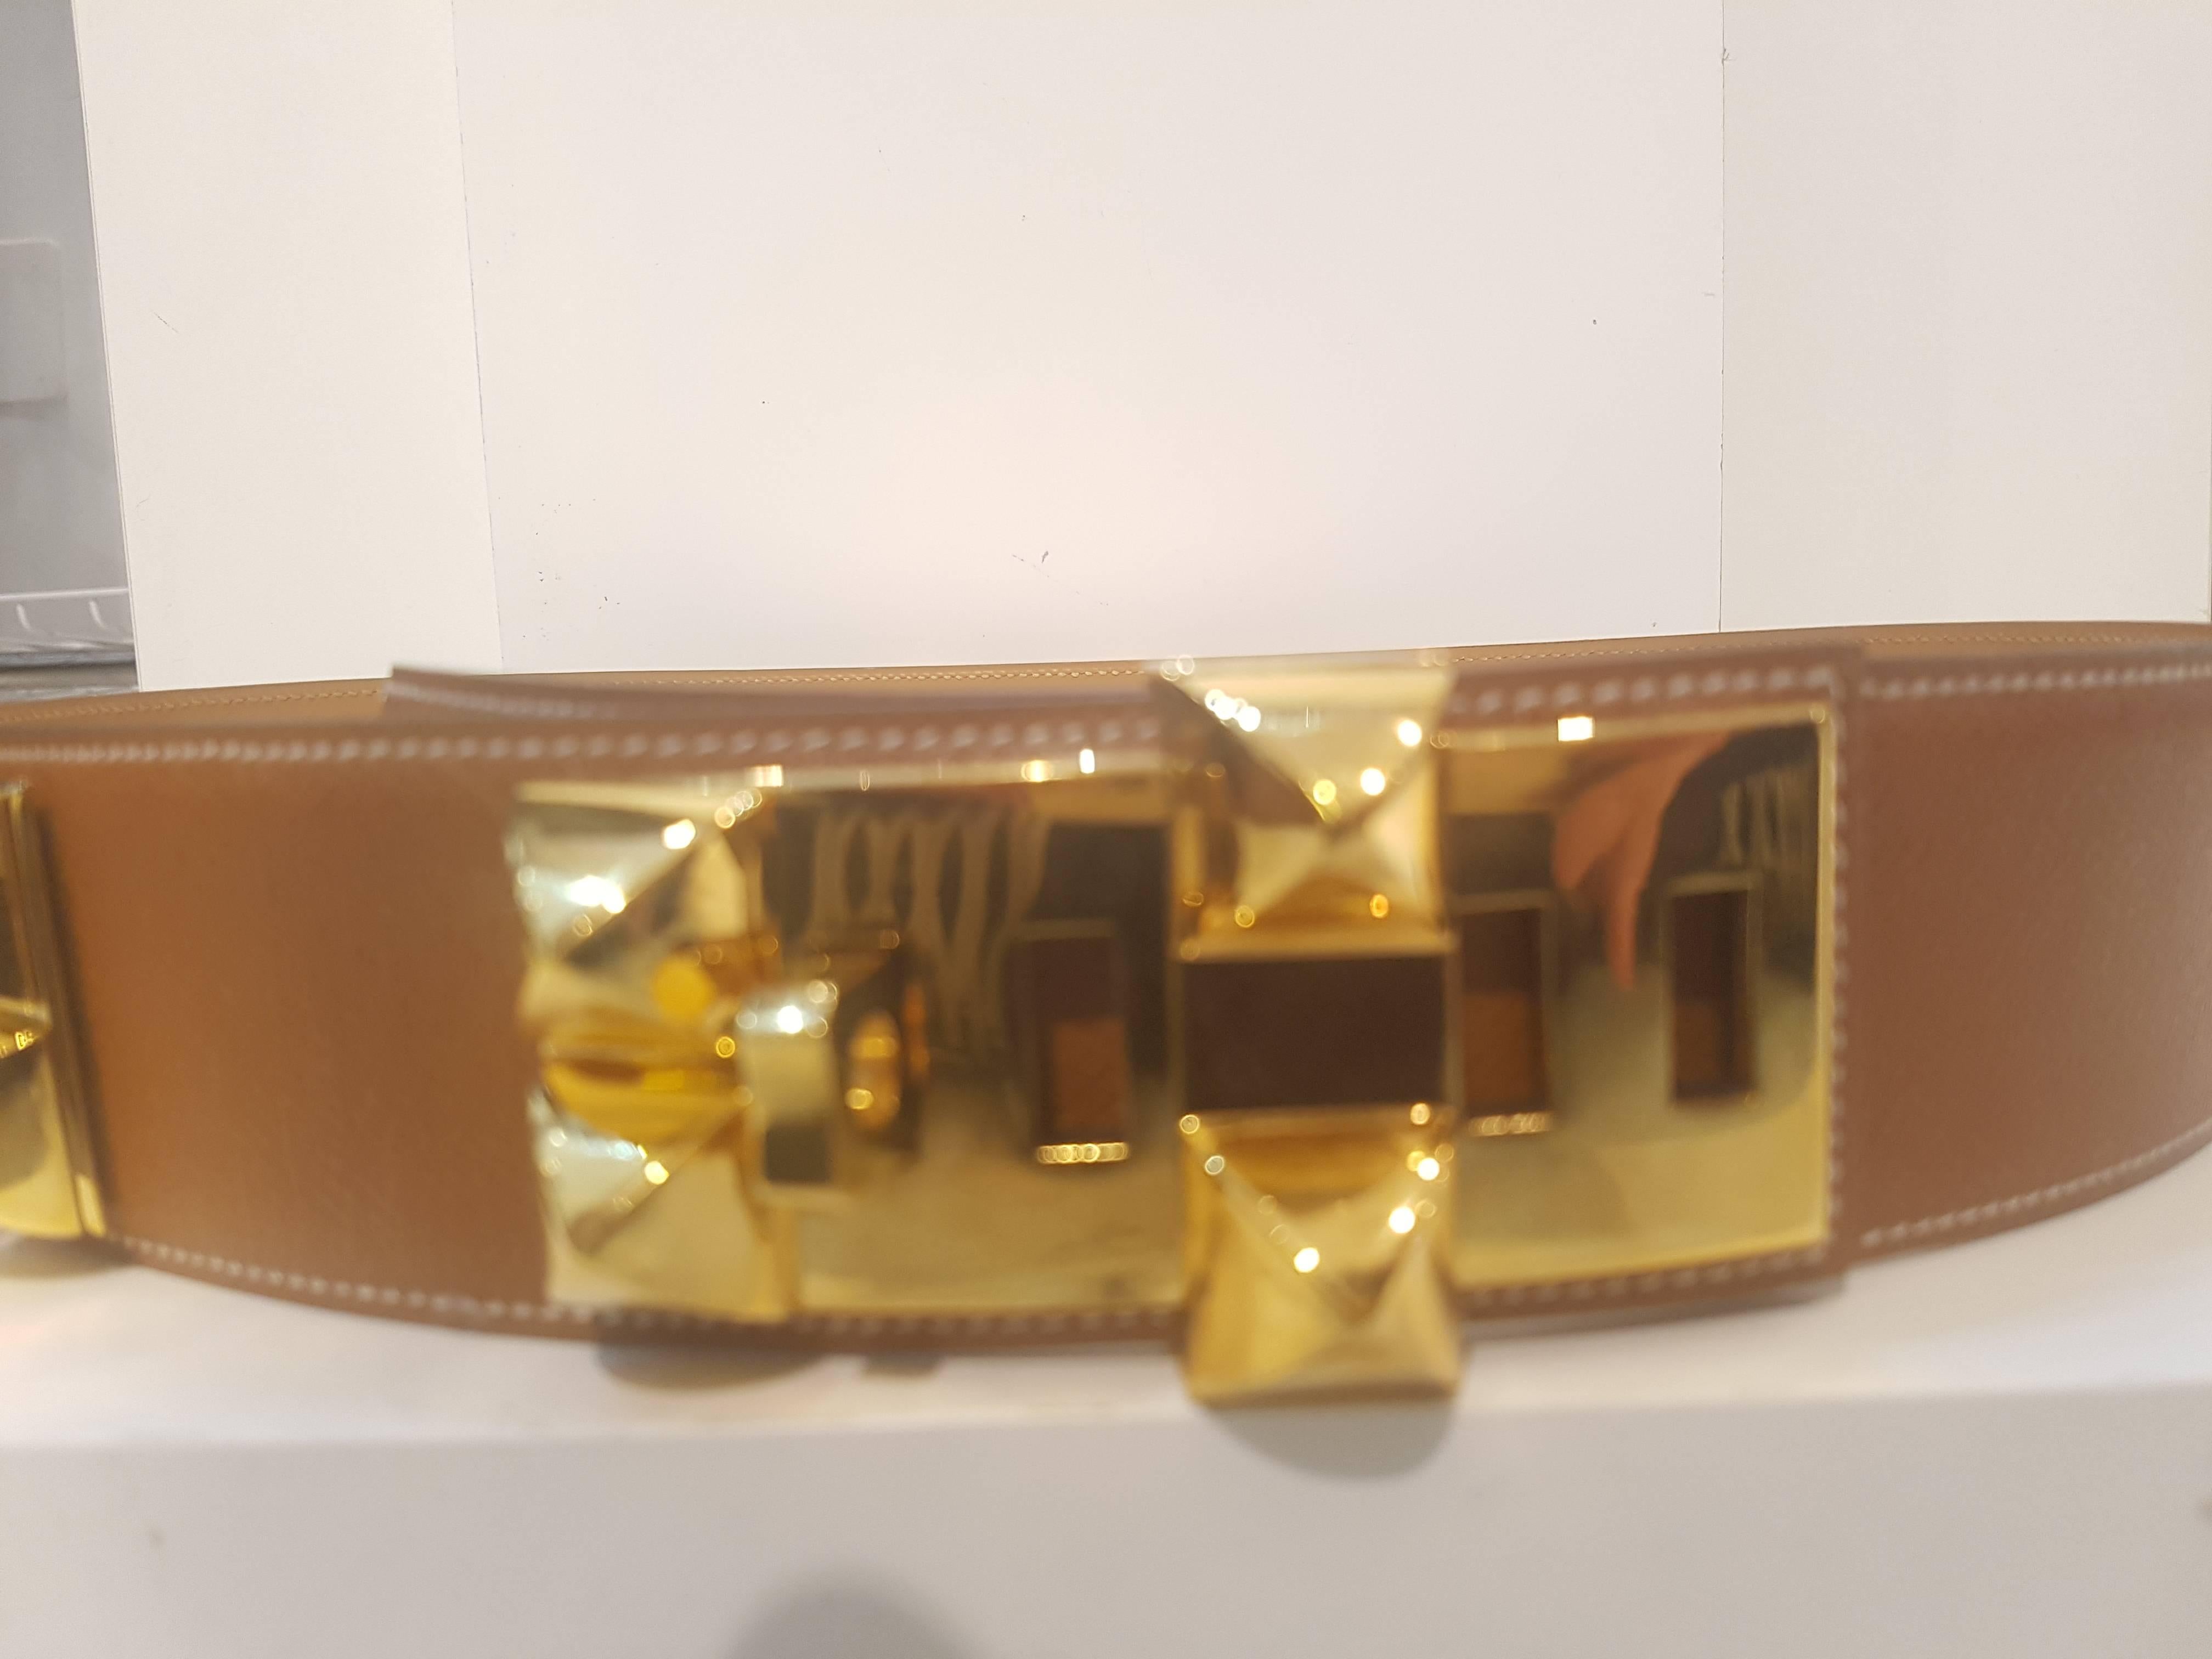 Popular vintage Hermes Collier De Chien Belt is up for sale. Inspired by a dog collar this is one of the most wanted Hermes belt. Pyramid studs are Hermes signature motif. Sold out everywhere. Plated gold hardware 
Still with box is in perfect